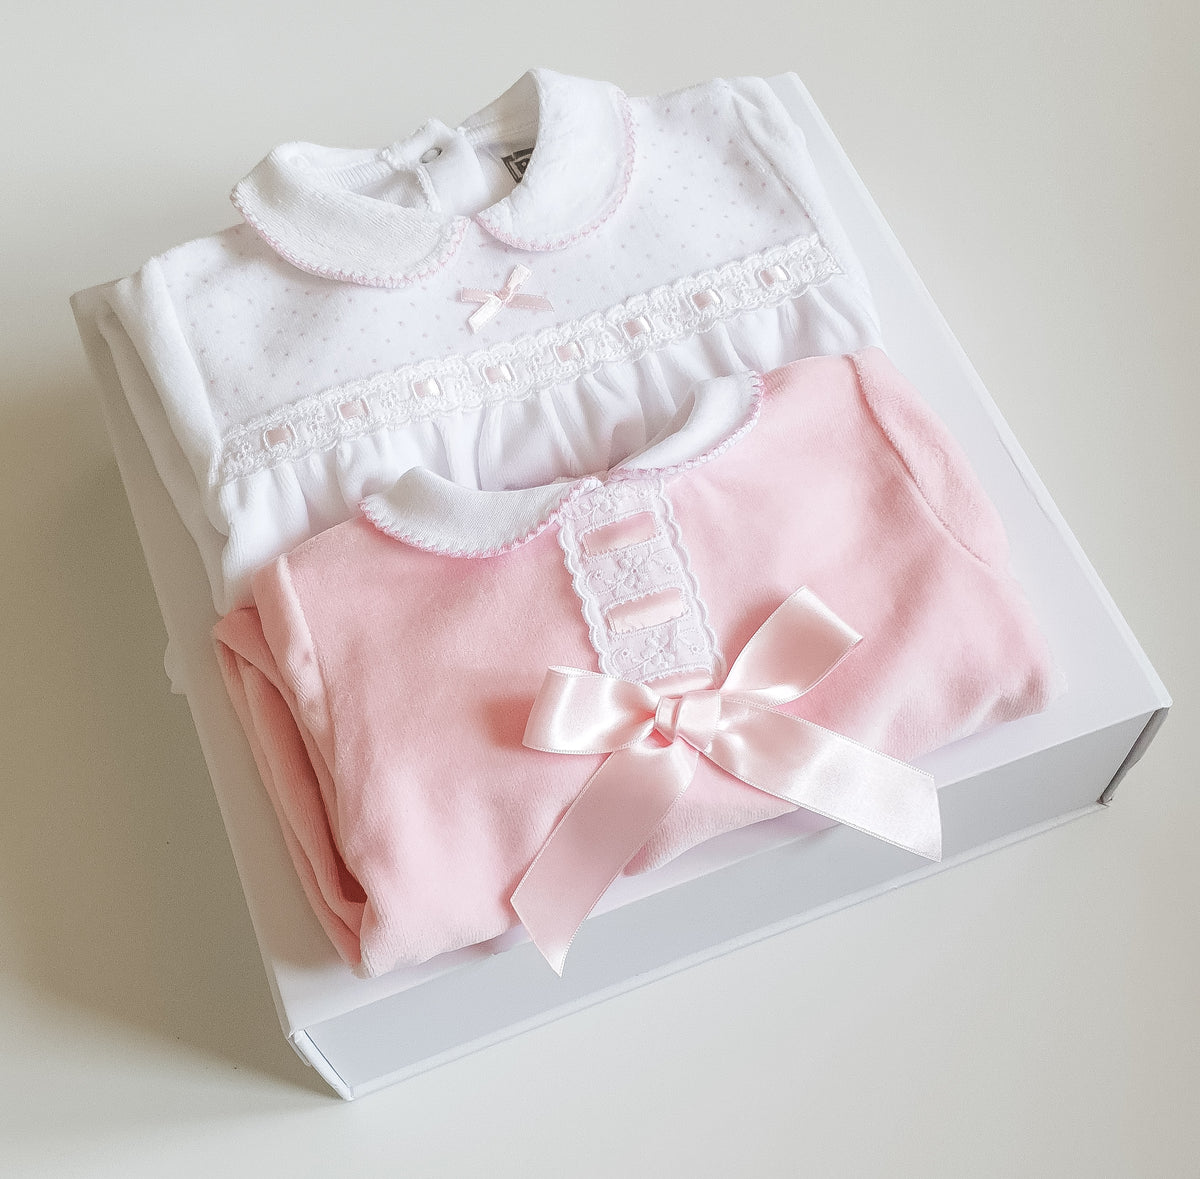 White and Pink Baby Sleepsuits